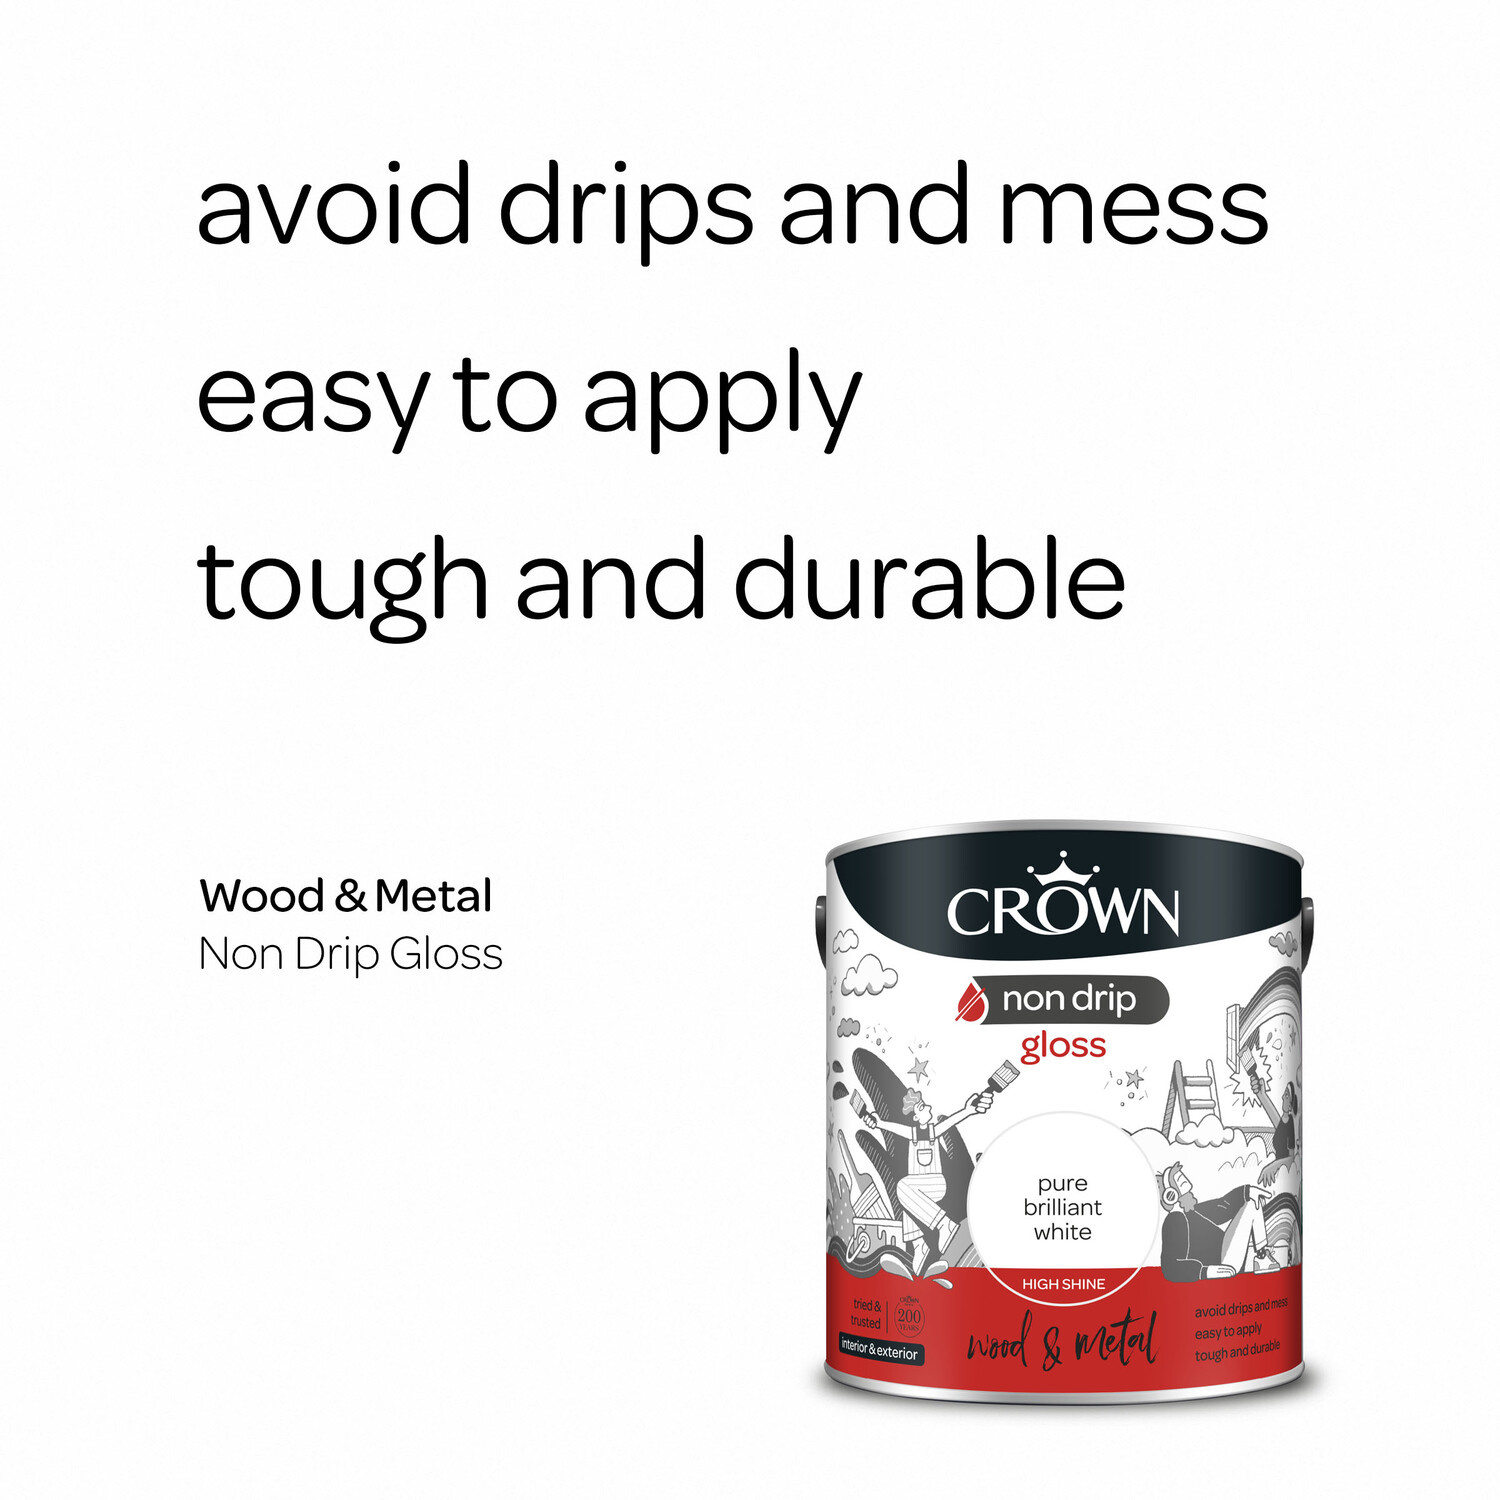 Crown Non Drip Gloss Wood and Metal Paint - Pure Brilliant White Image 4